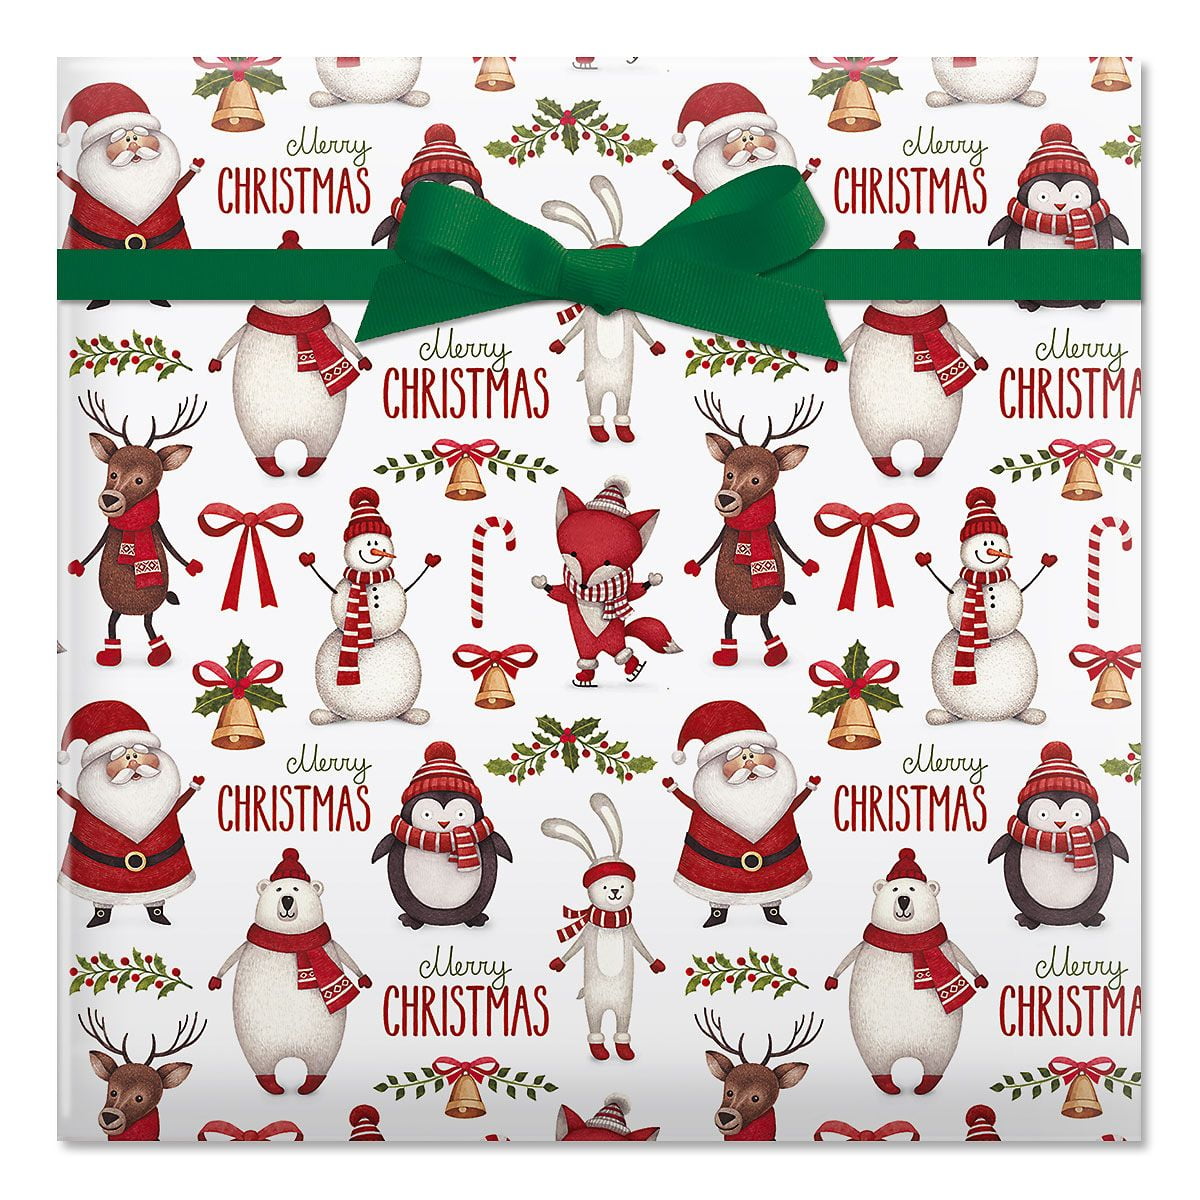 Current String of Lights Jumbo Rolled Gift Wrap - 1 Giant Roll, 23 inches  Wide by 32 feet Long, Holiday Wrapping Paper 